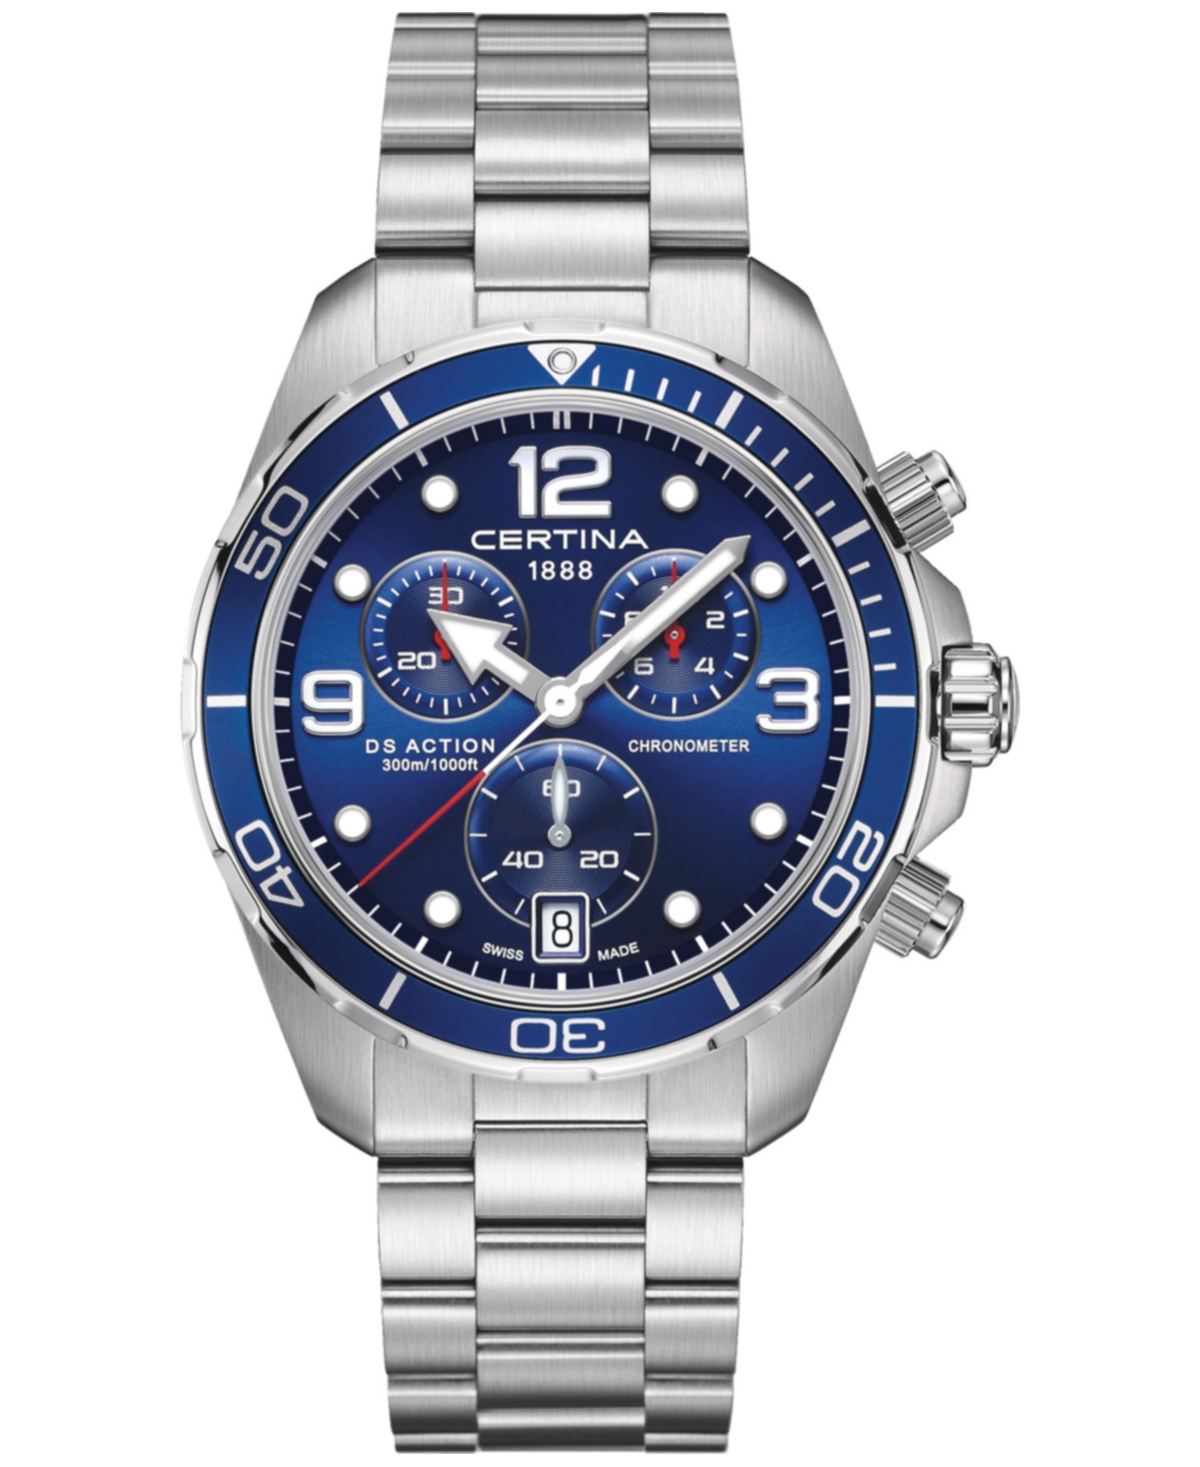 Certina Men's Swiss Chronograph Ds Action Stainless Steel Bracelet Watch 43mm In Blue